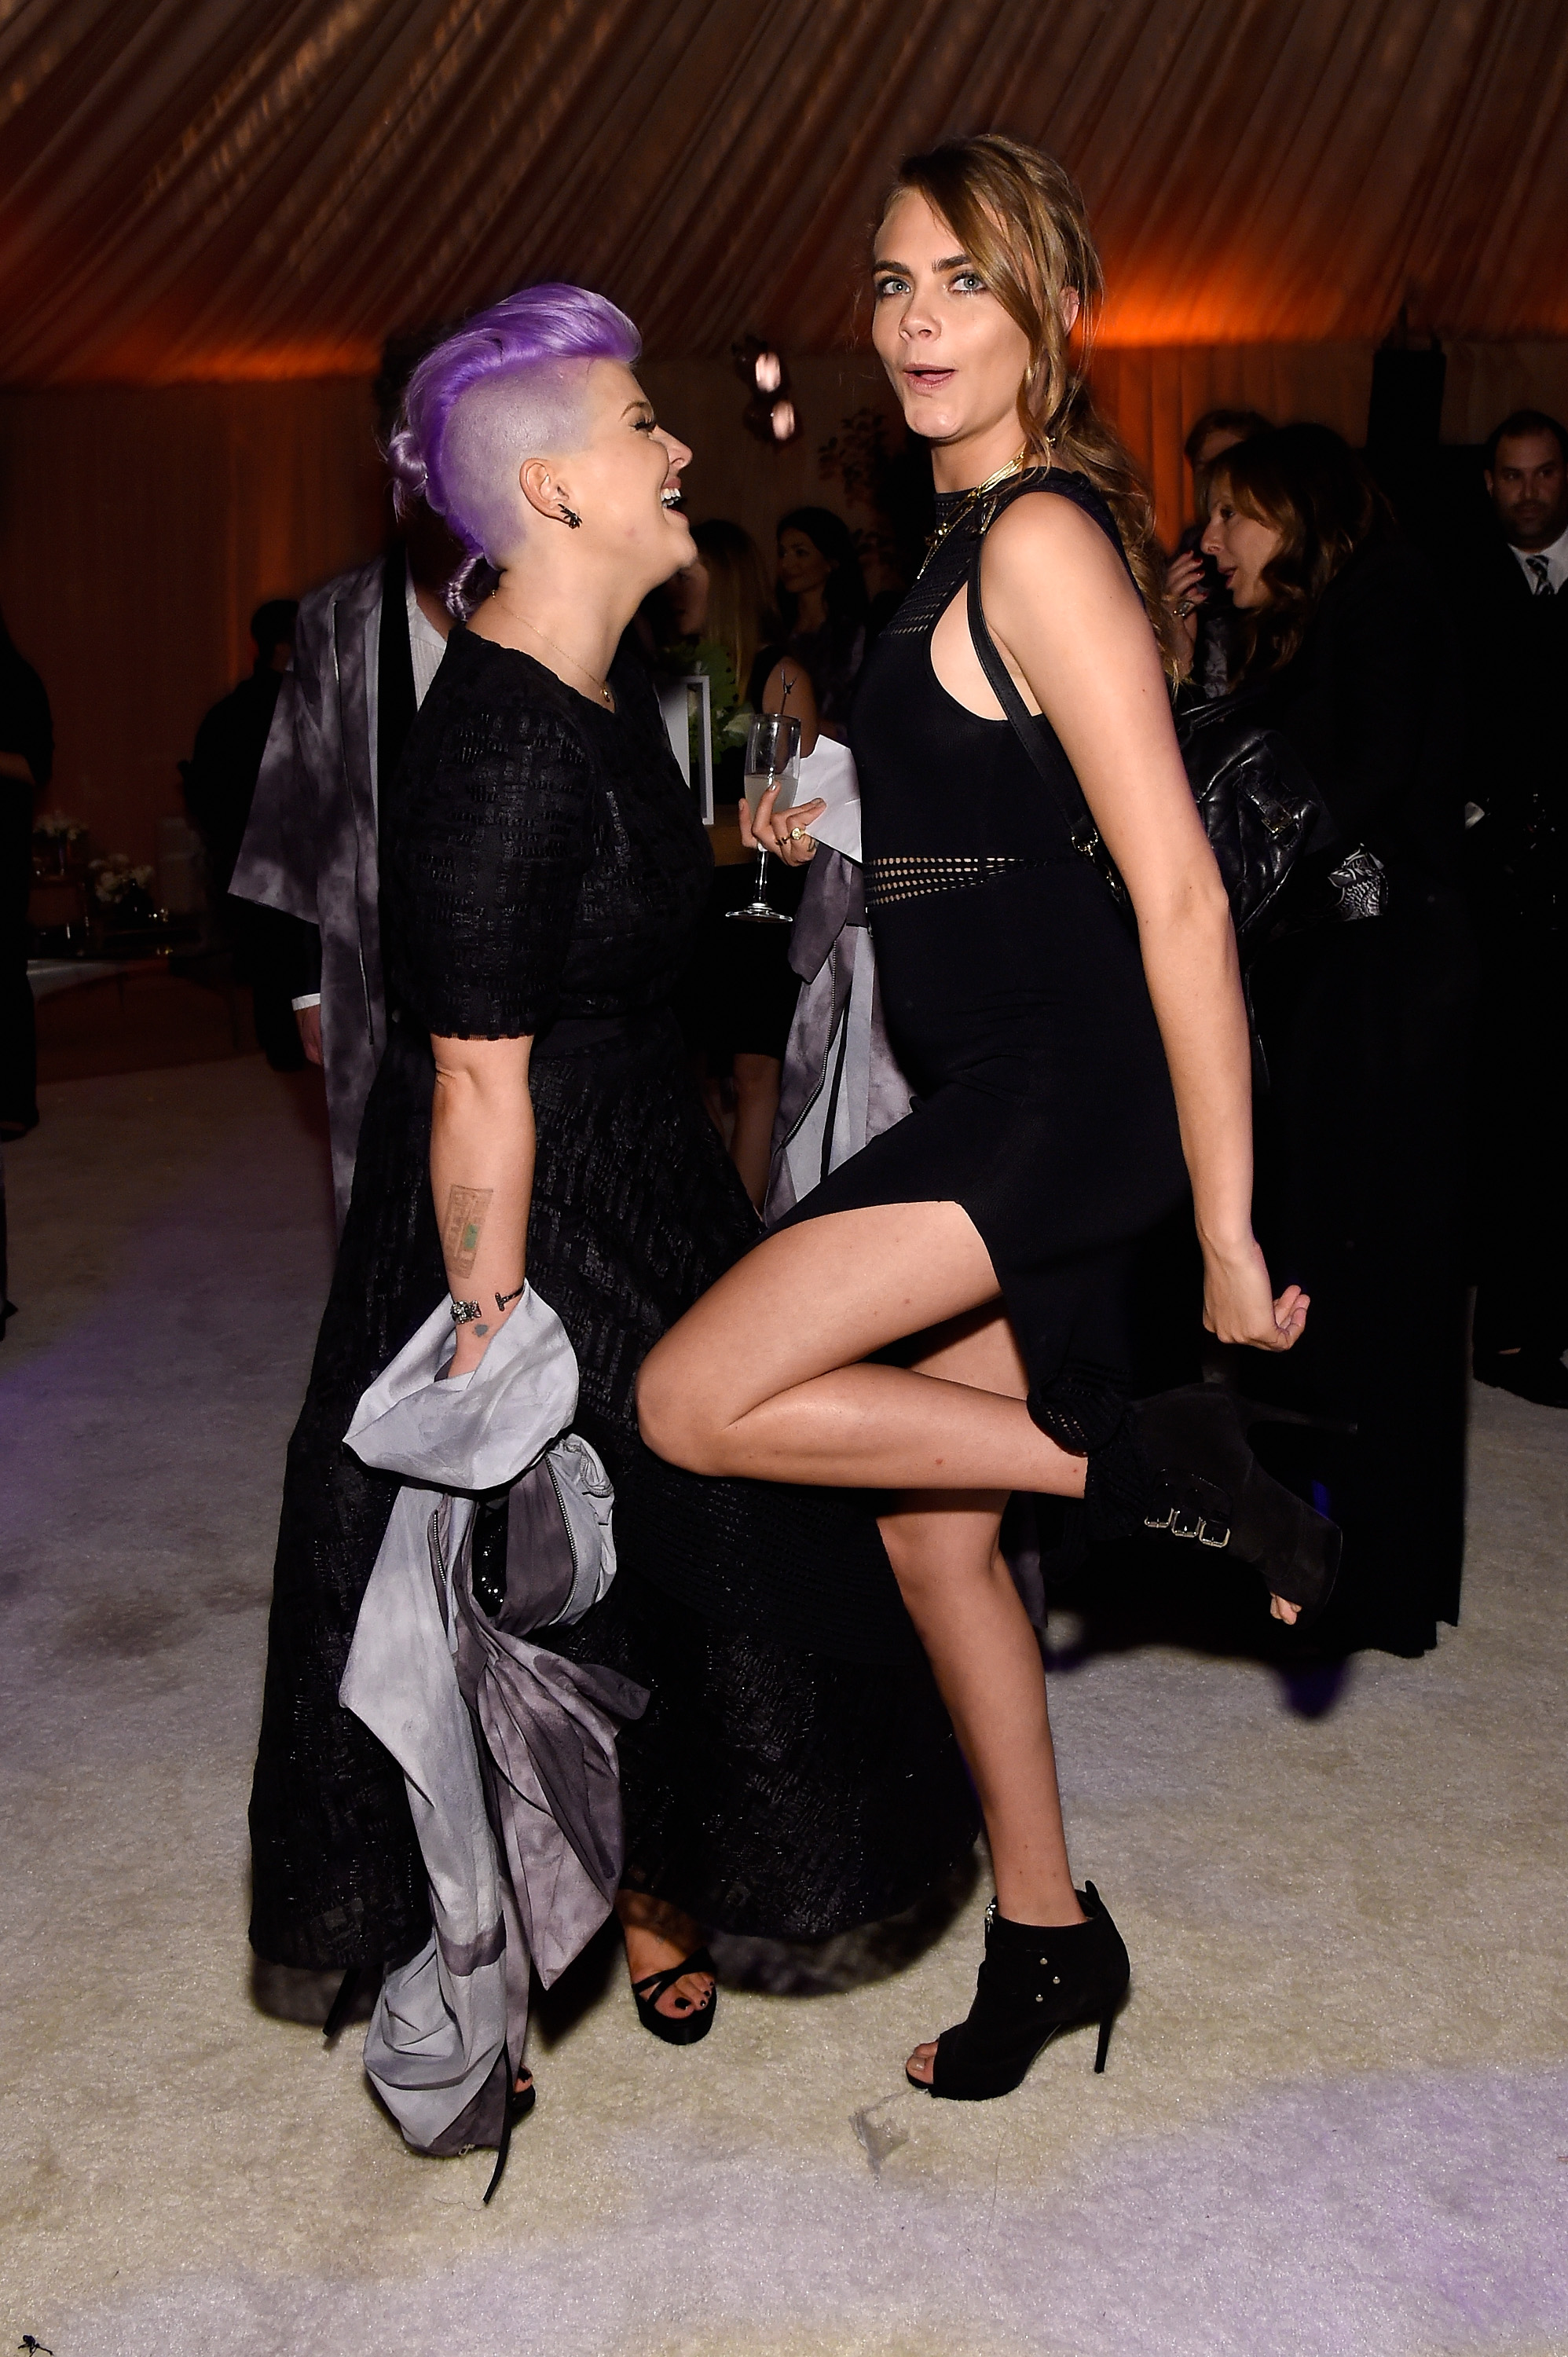 Kelly Osbourne & Cara Delevingne - The Art Of Elysium And Samsung Galaxy Present Marina Abramovic's HEAVEN, With Support From GREY GOOSE Vodka